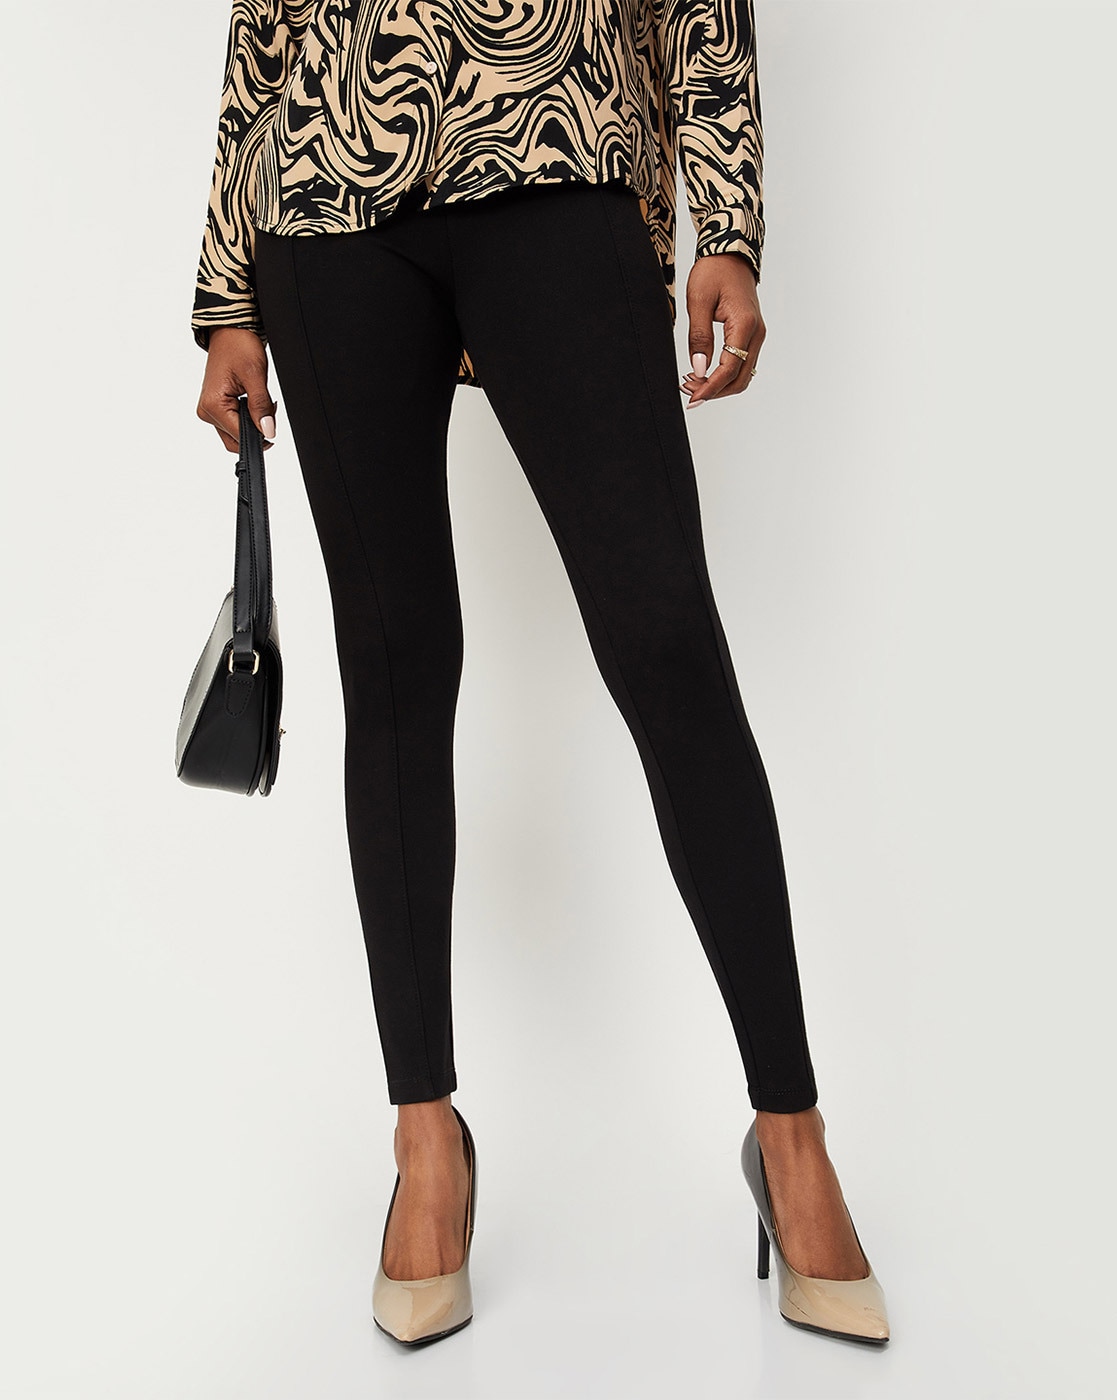 Buy Black Trousers & Pants for Women by MAX Online